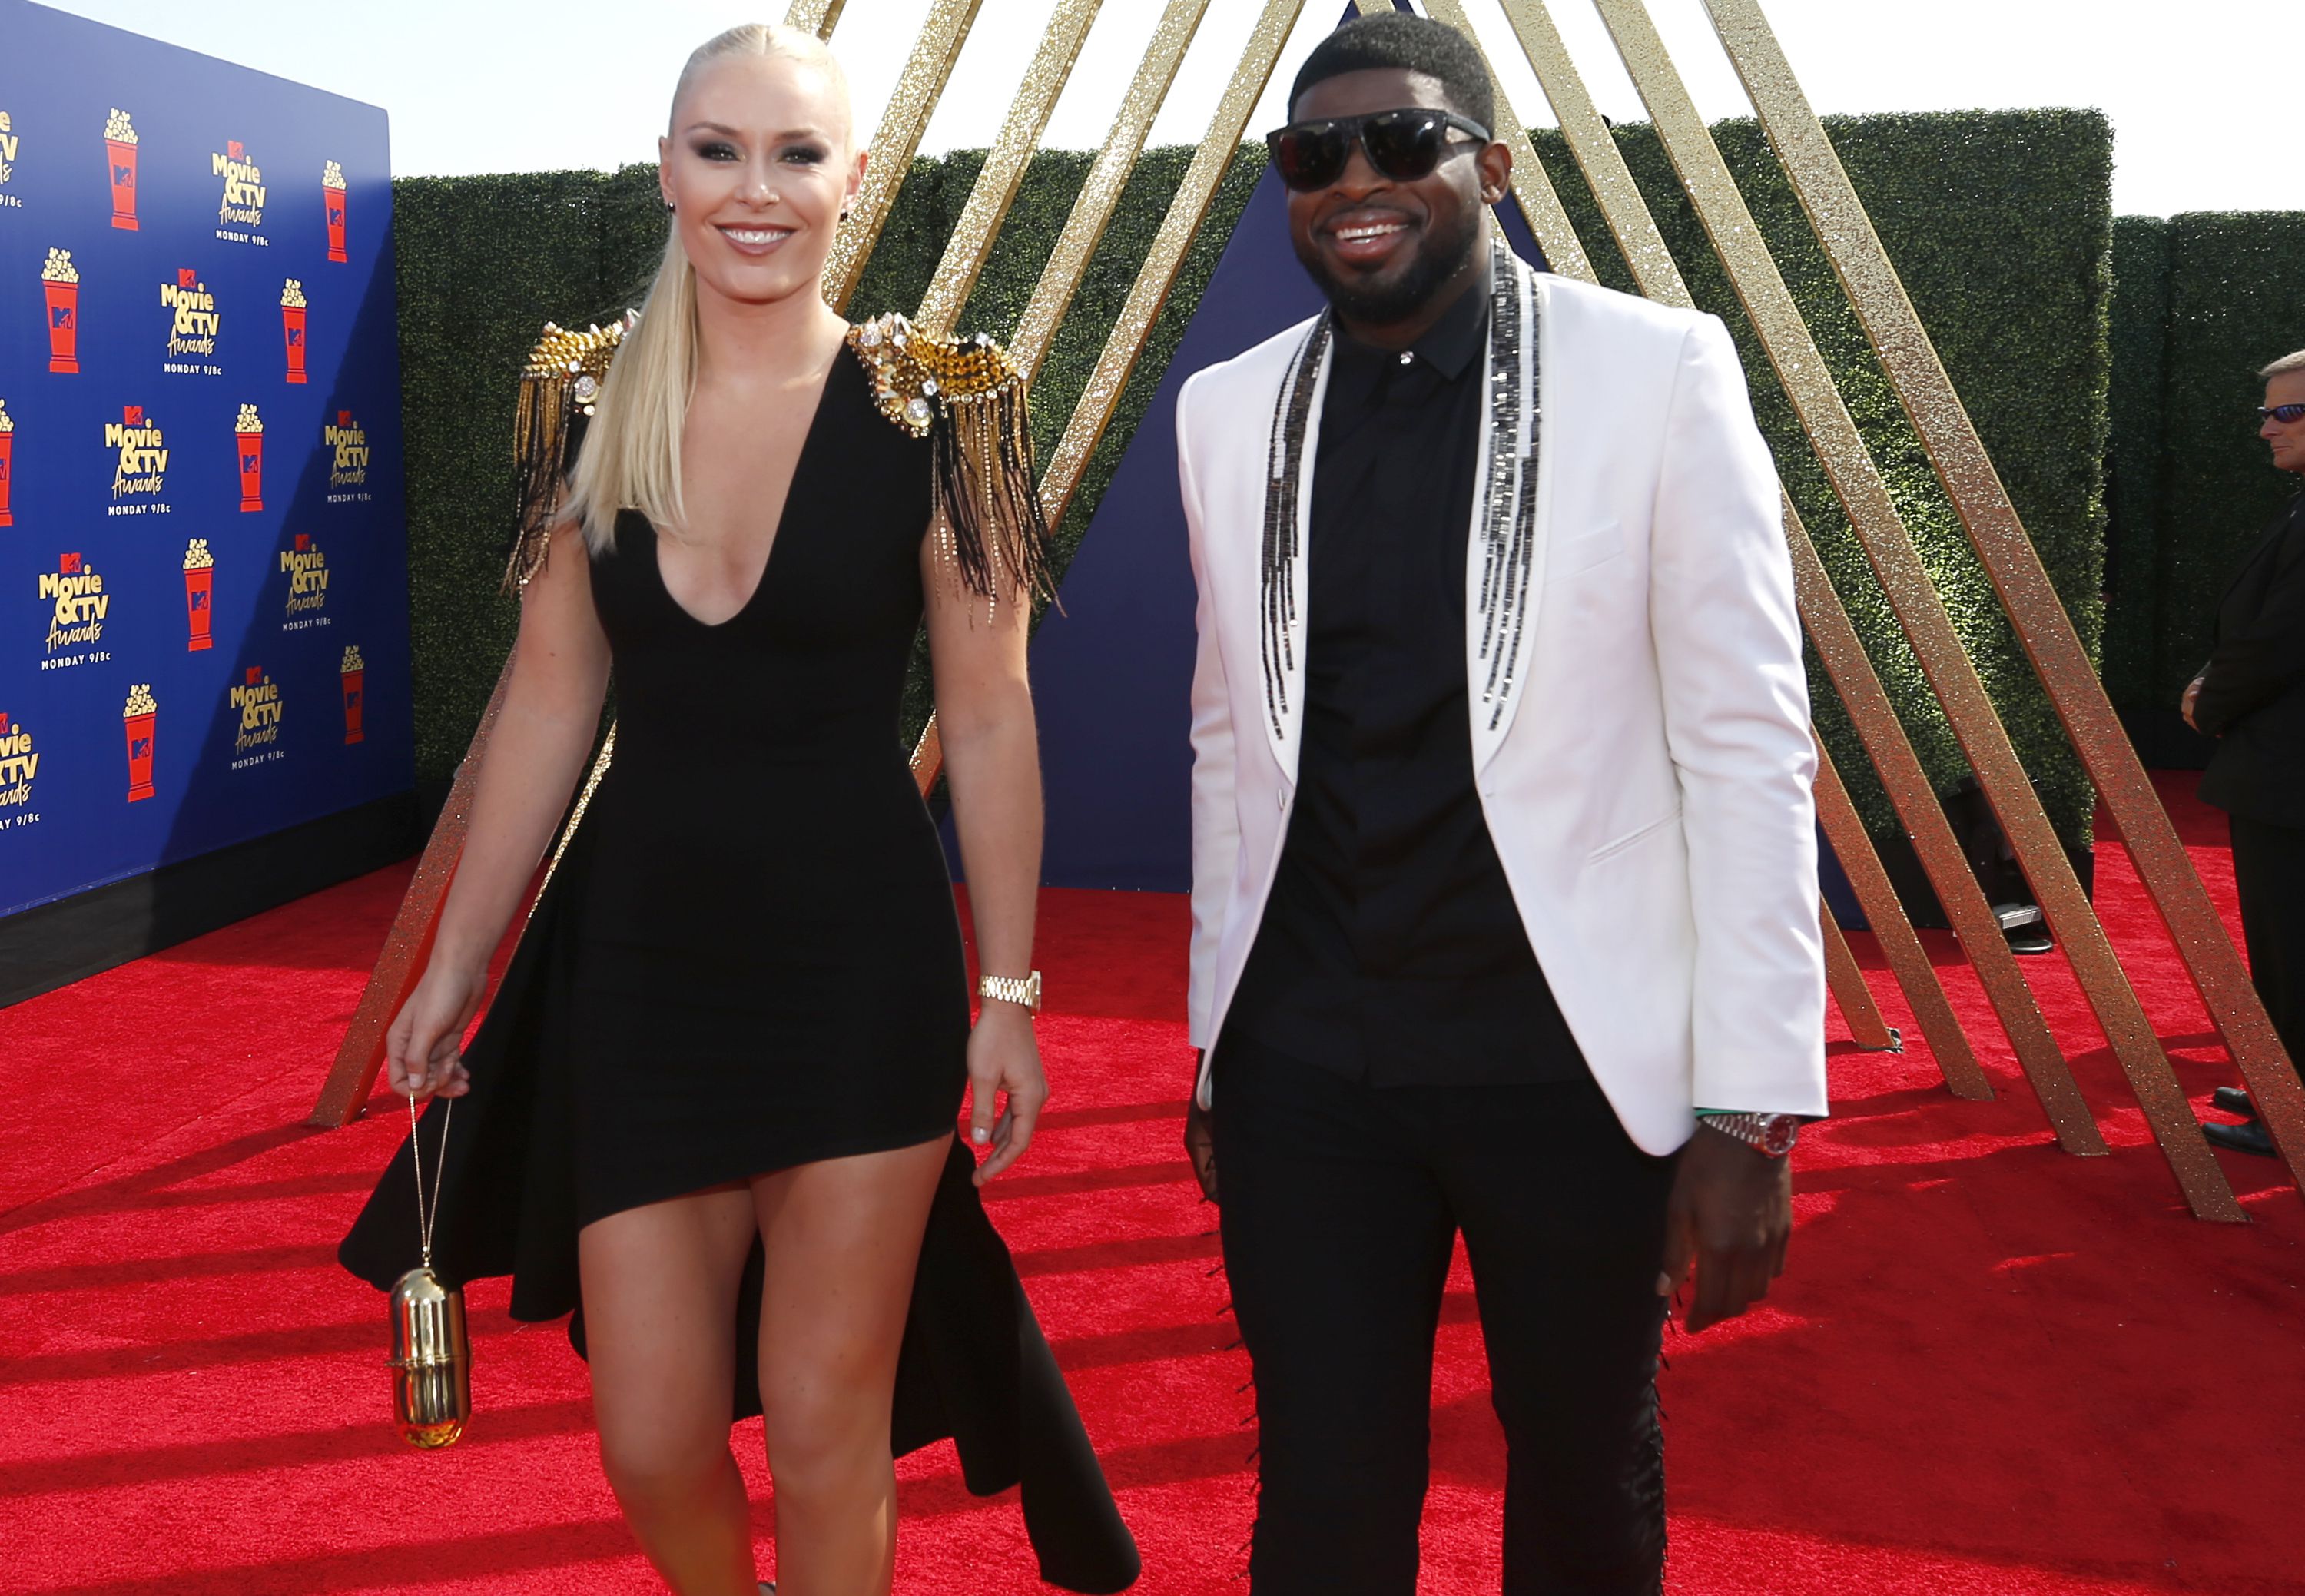 Sports power couple PK Subban and Lindsey Vonn are getting married